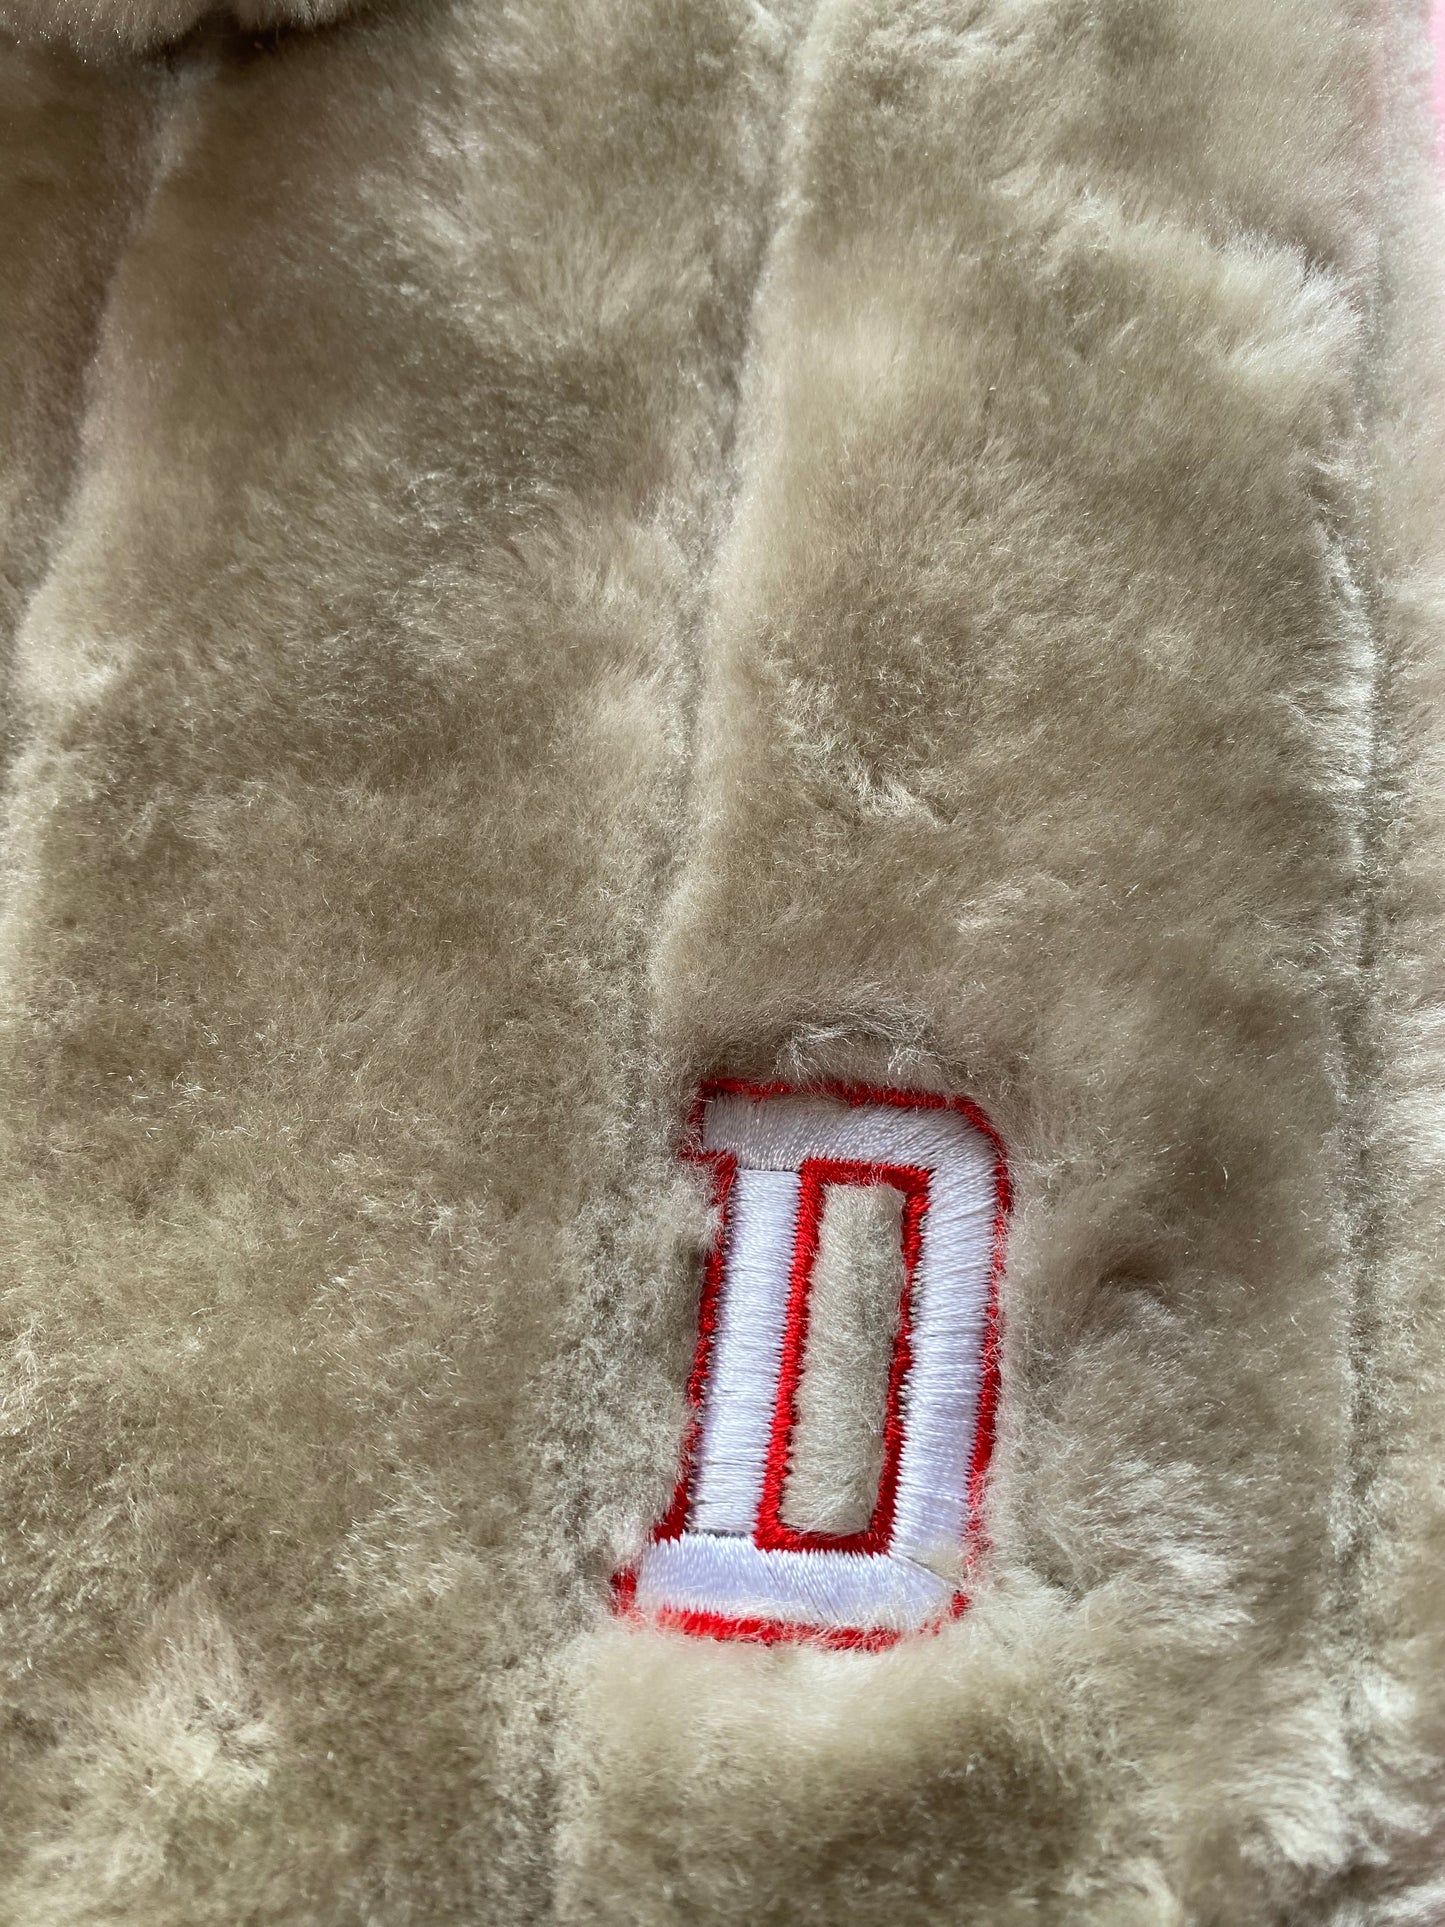 D Varsity Initial Champagne Hot Water Bottle - White with red outline - SALE